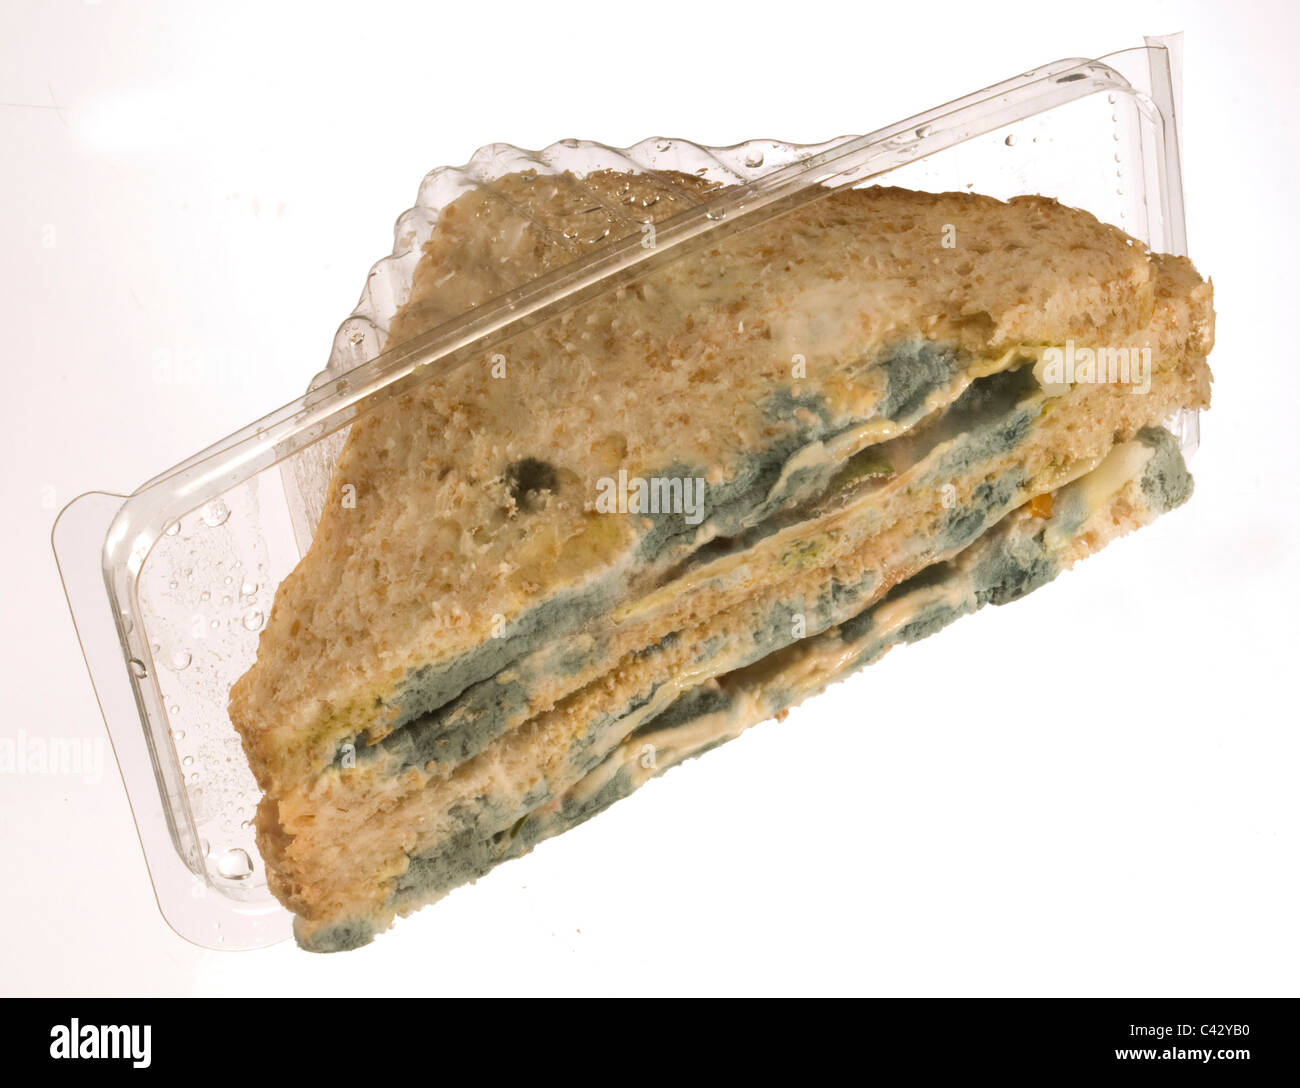 Old rotten brown bread sandwich which had been sealed inside it's plastic packaging in a refrigerator for about two months. Stock Photo